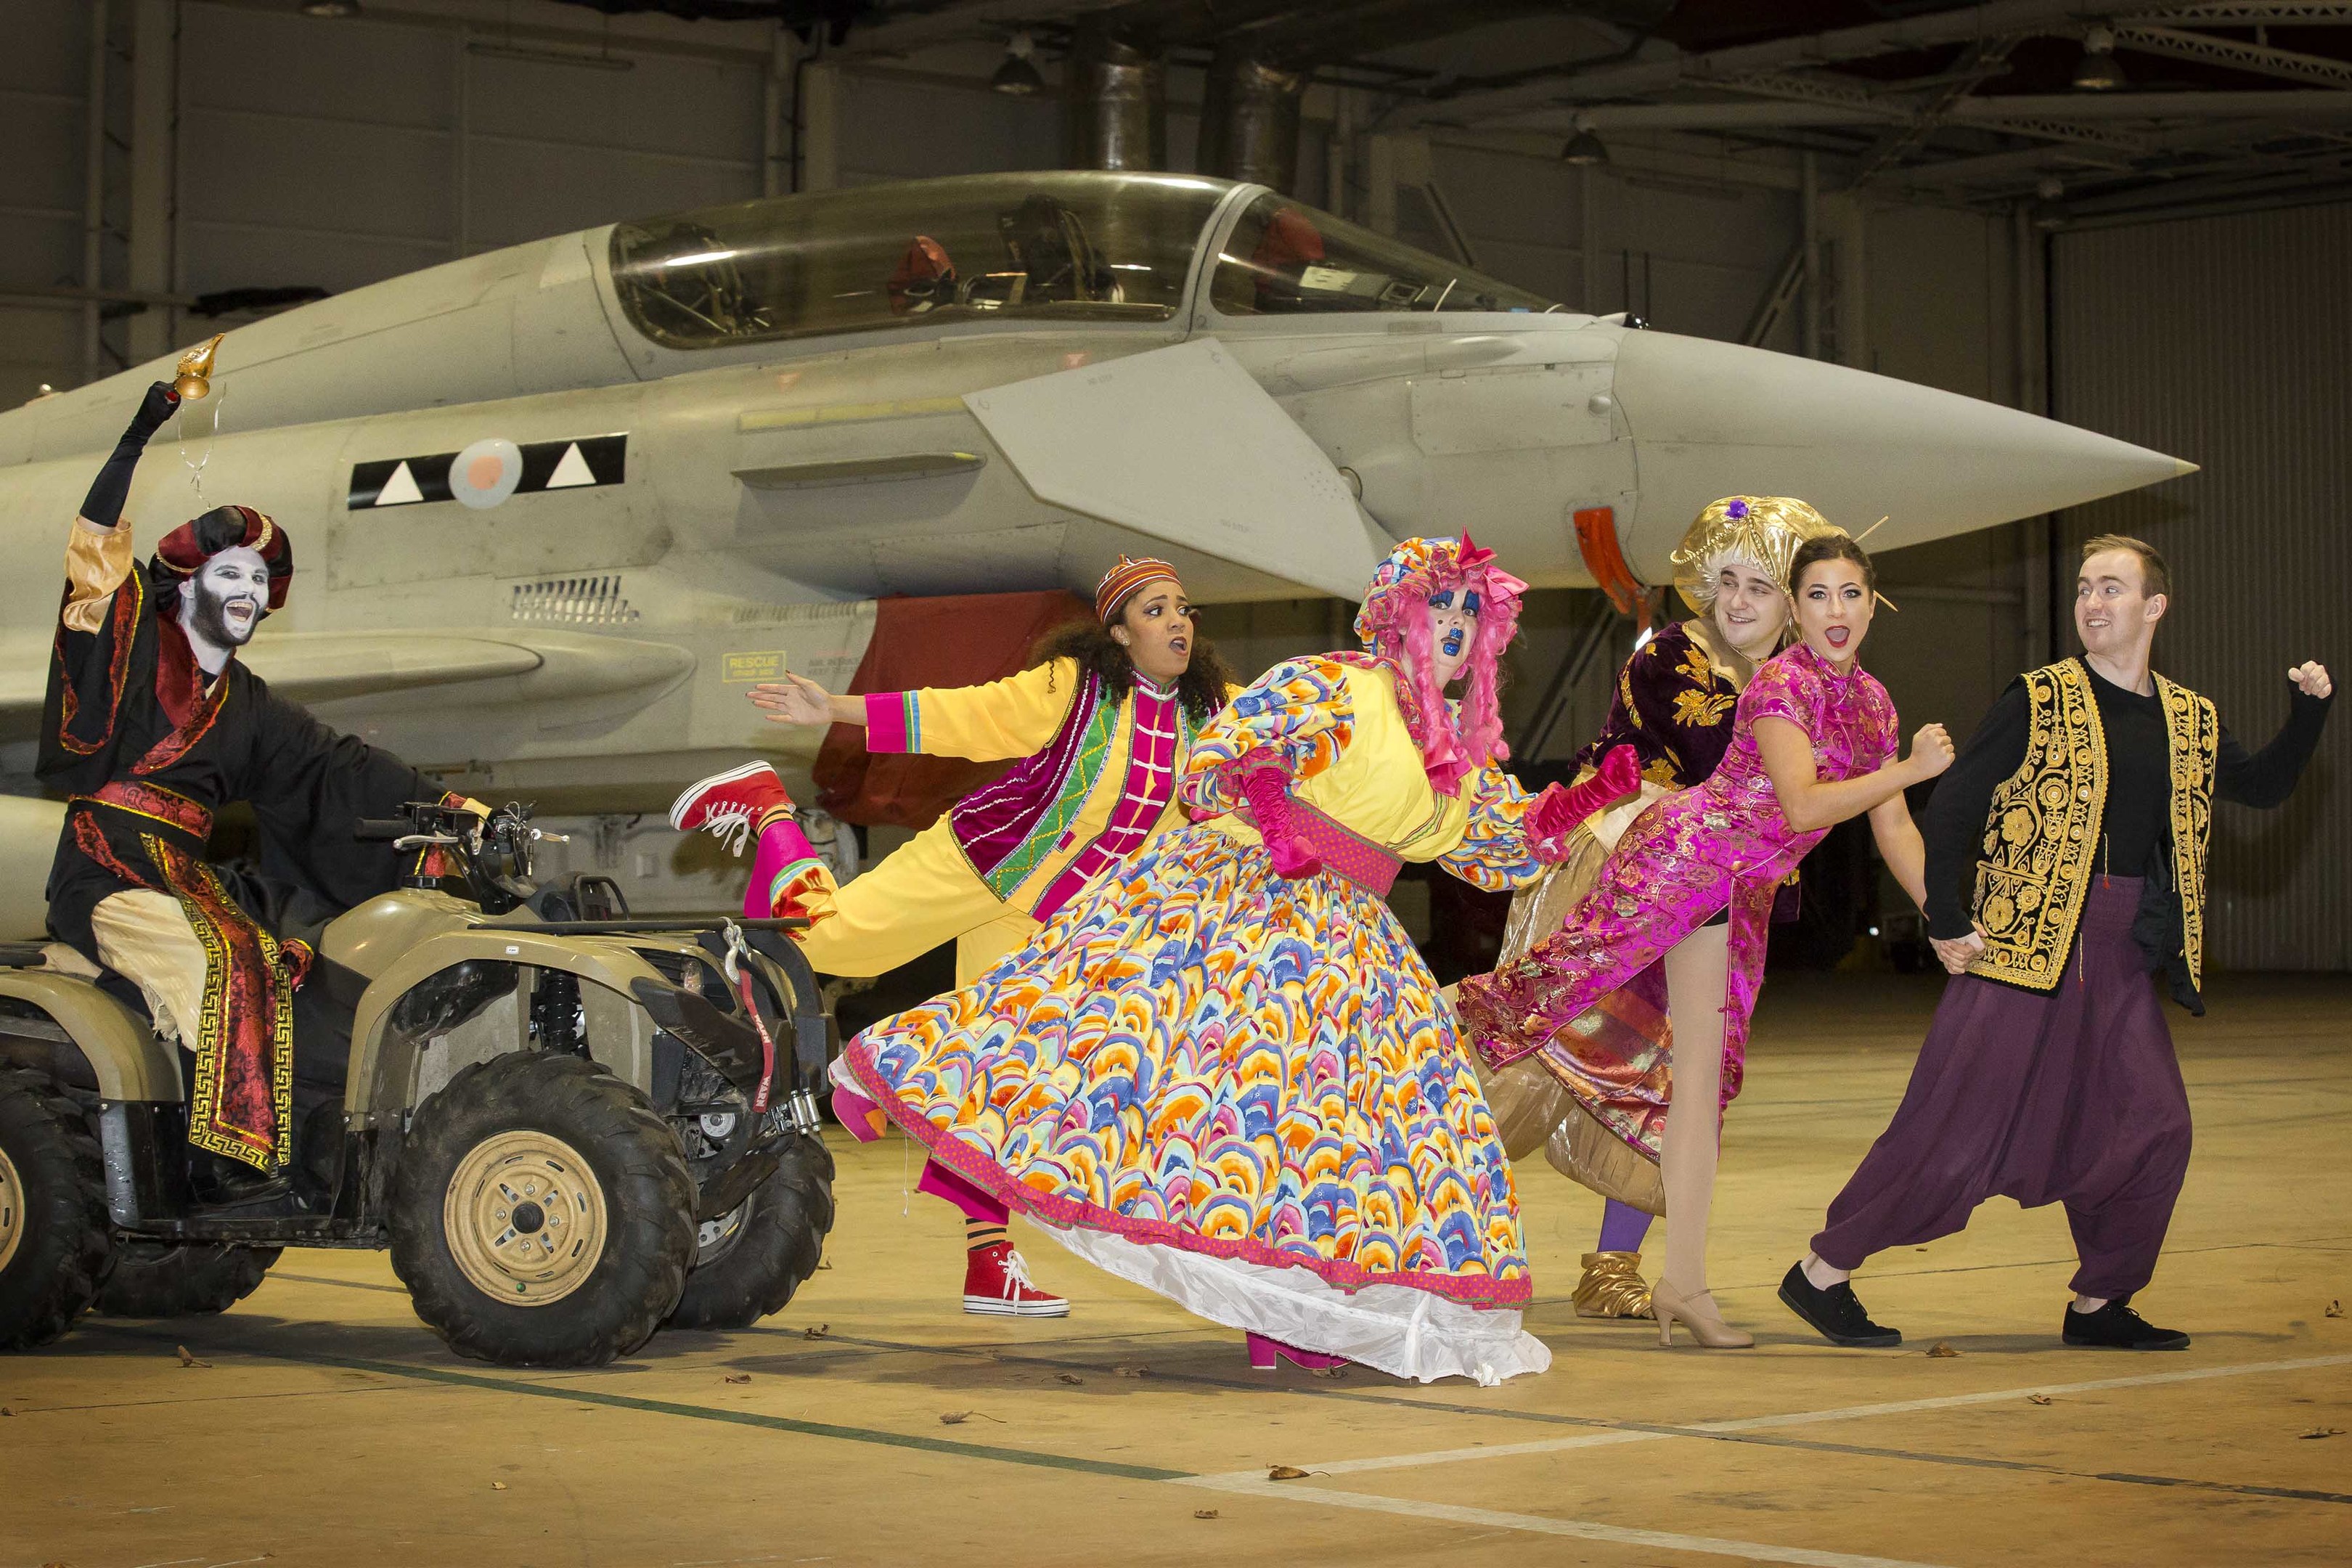 Stars from the British Forces Foundation's panto bus appeared at RAF Lossiemouth.